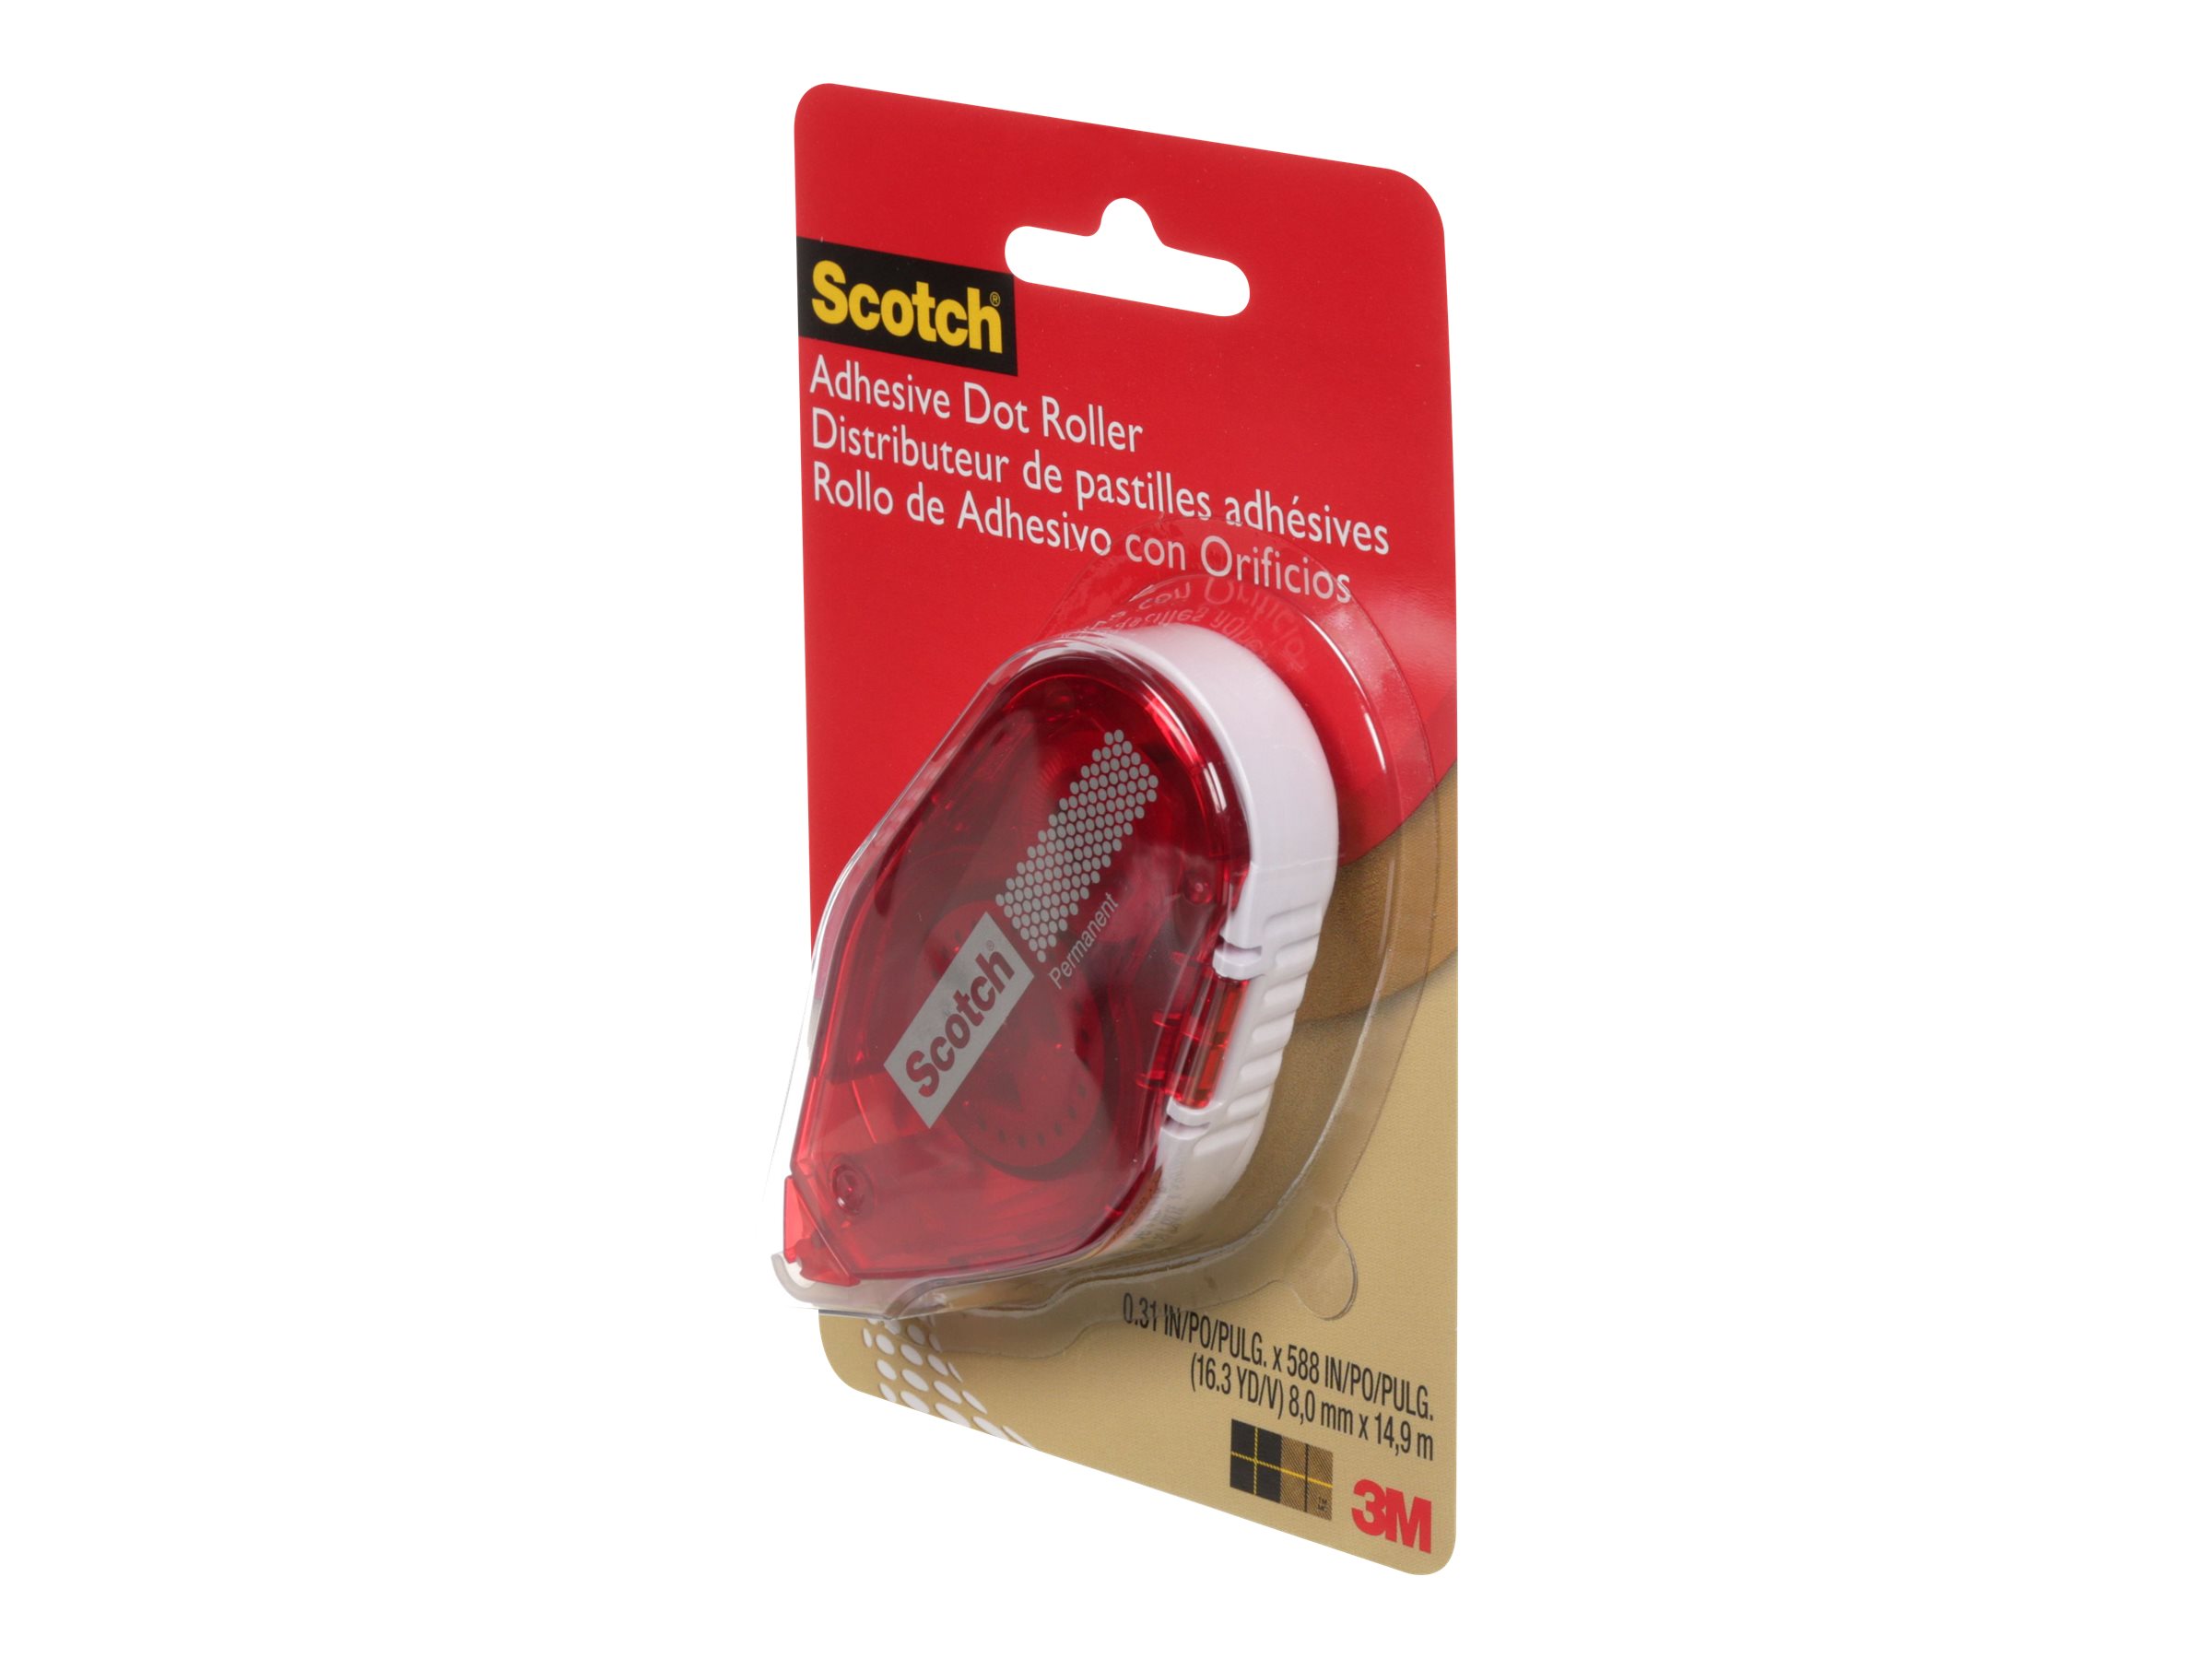 Scotch Adhesive Dot Roller Value Pack 0.3 in x 49 ft. 4/pk